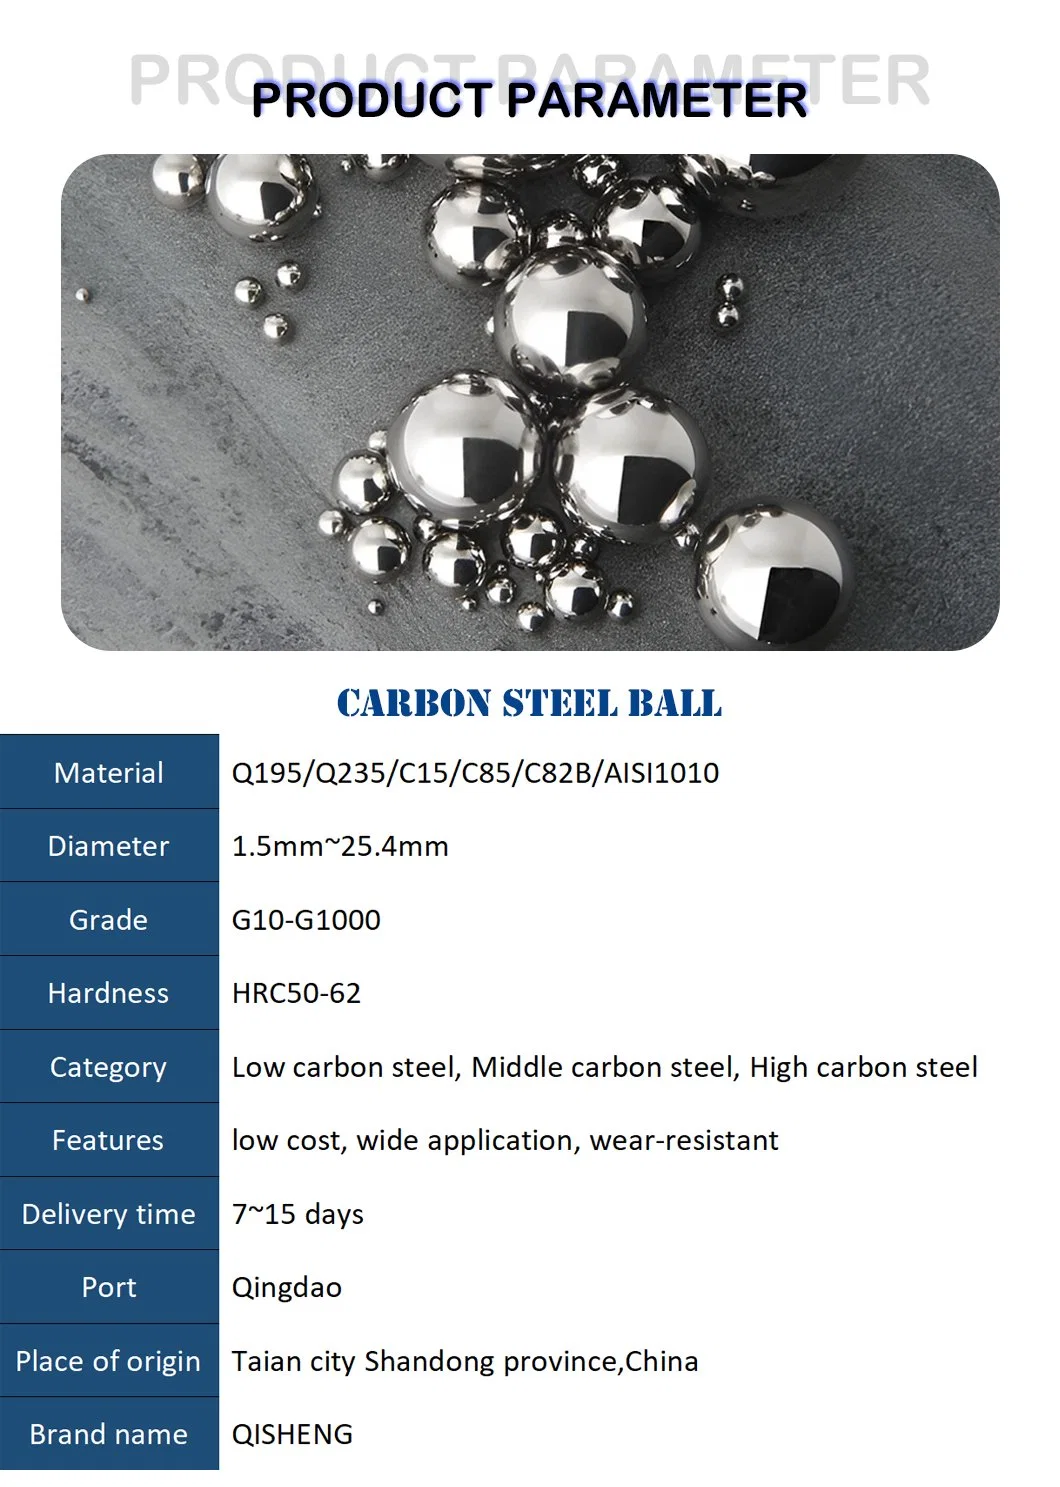 Carbon Steel Balls 12mm G40, G100, G200, G1000 for Bicycle Parts Accessories